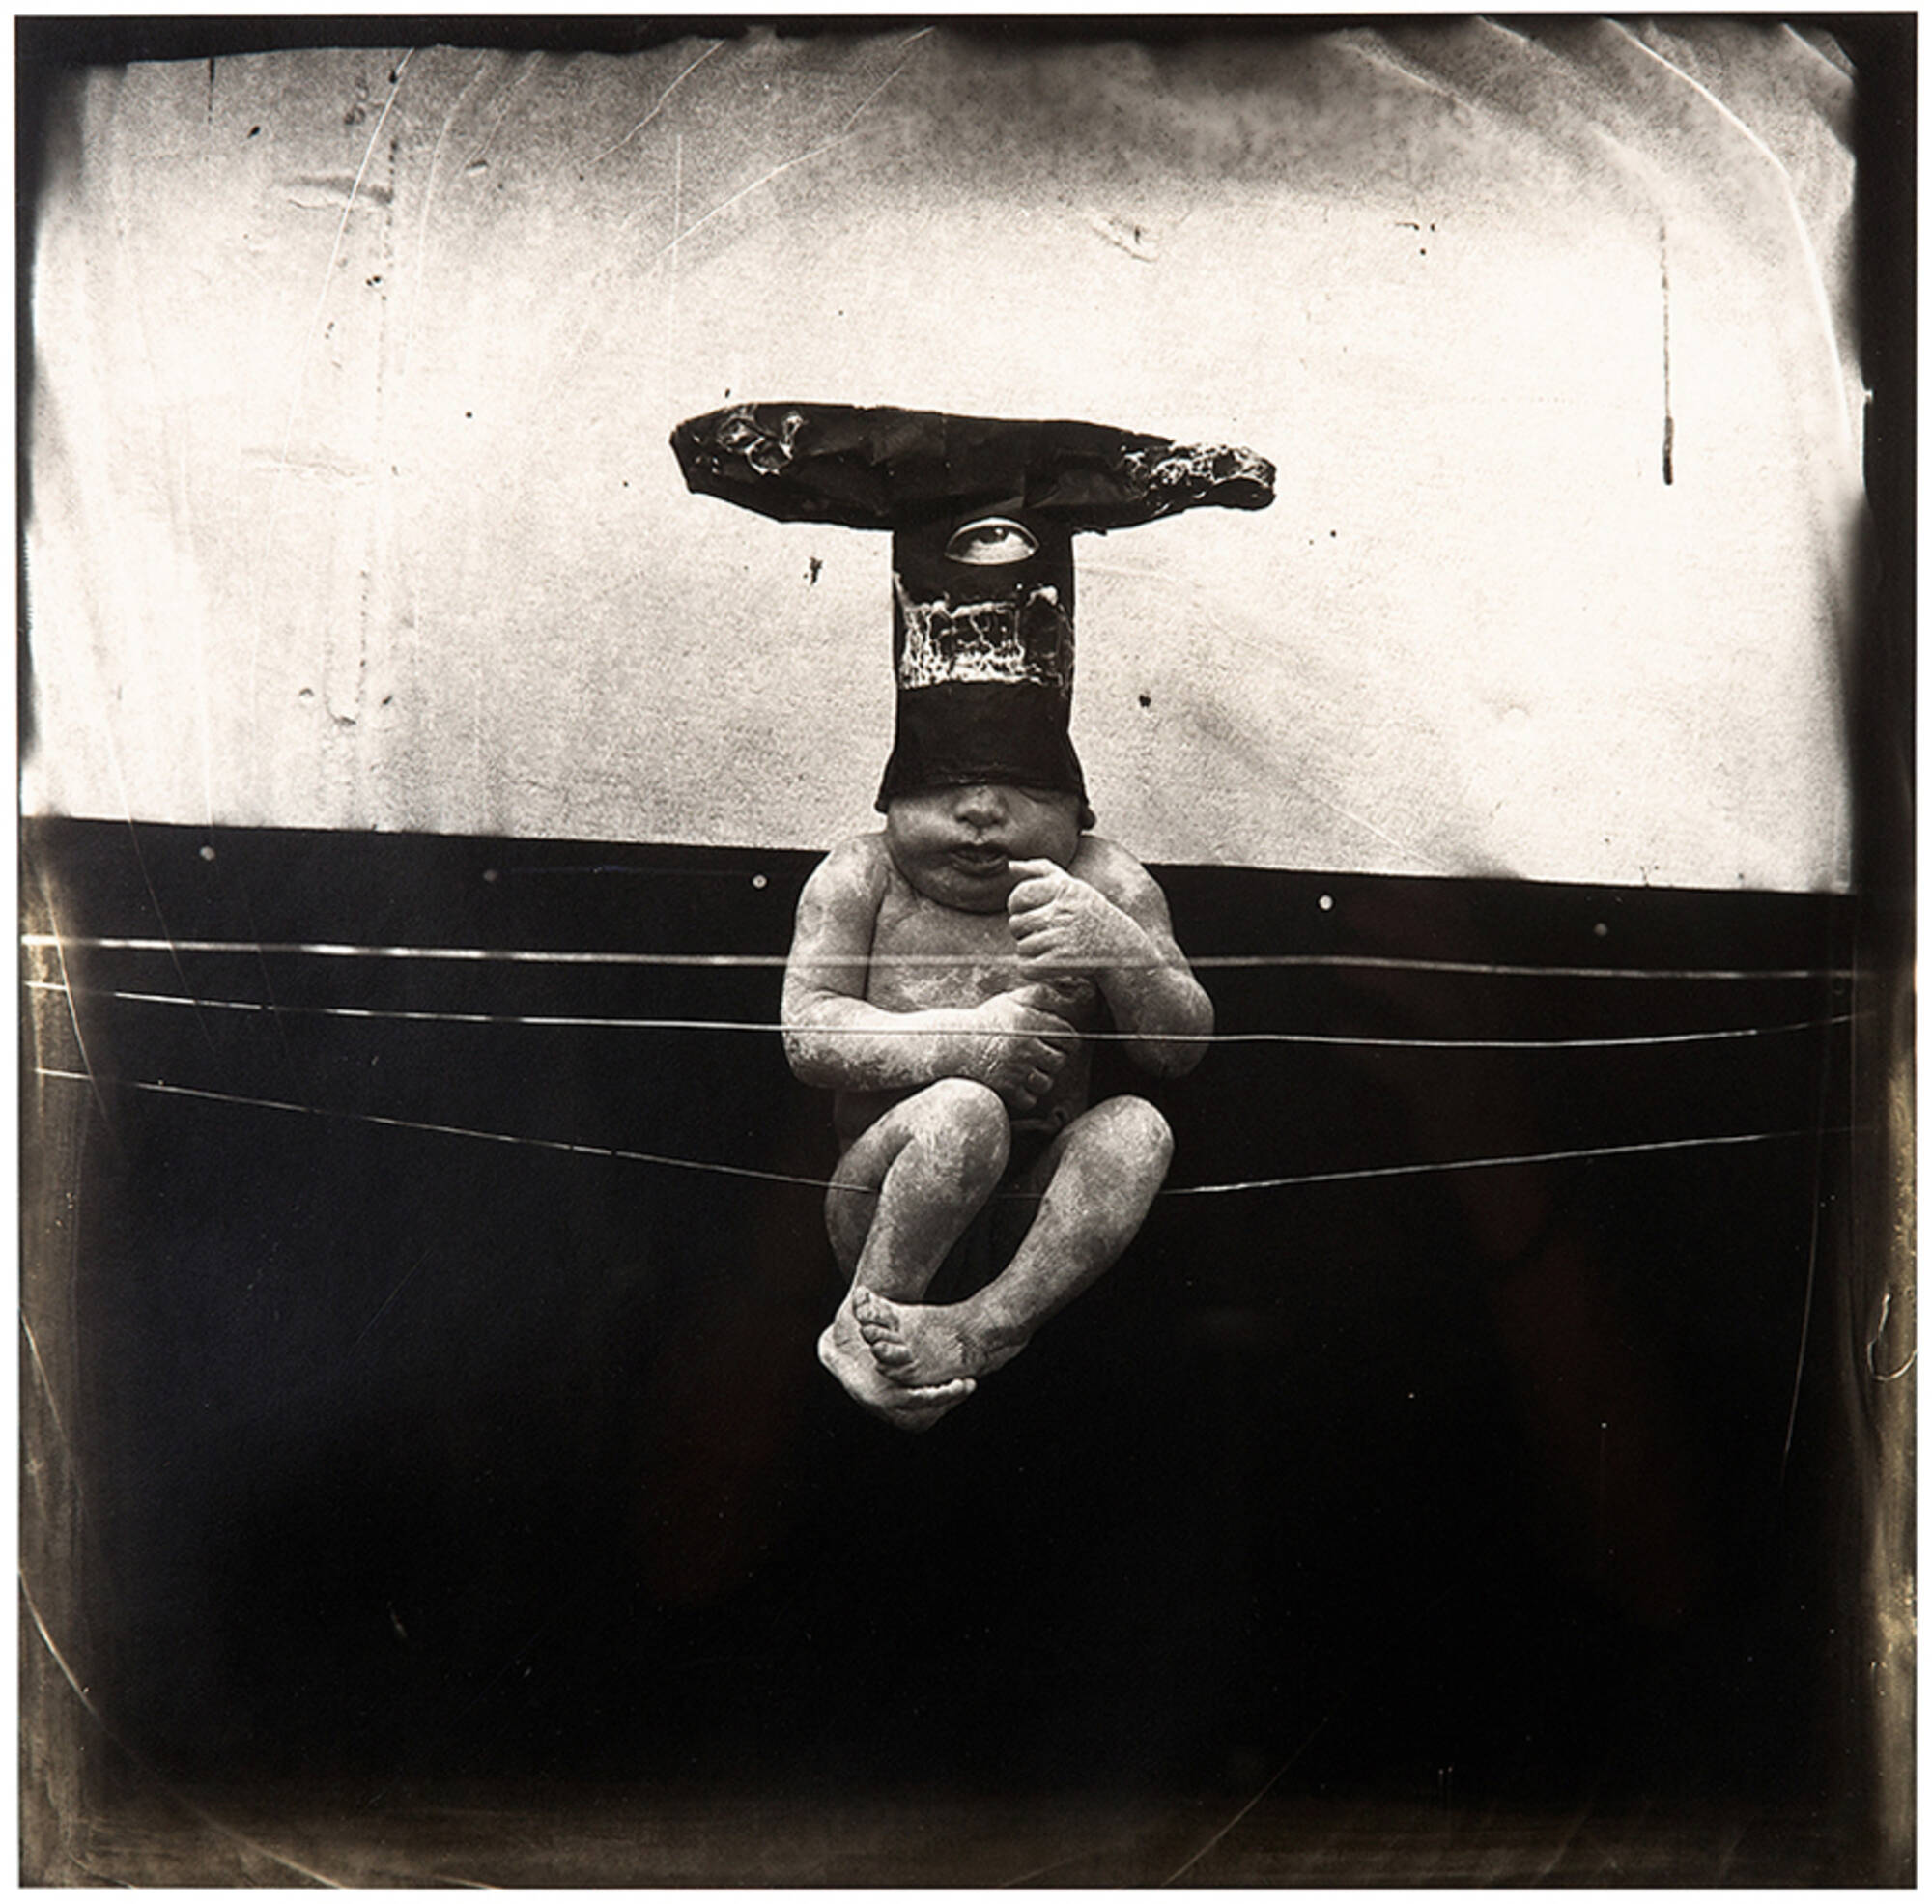 310: JOEL-PETER WITKIN, Counting Lessons in Purgatory, New Mexico 